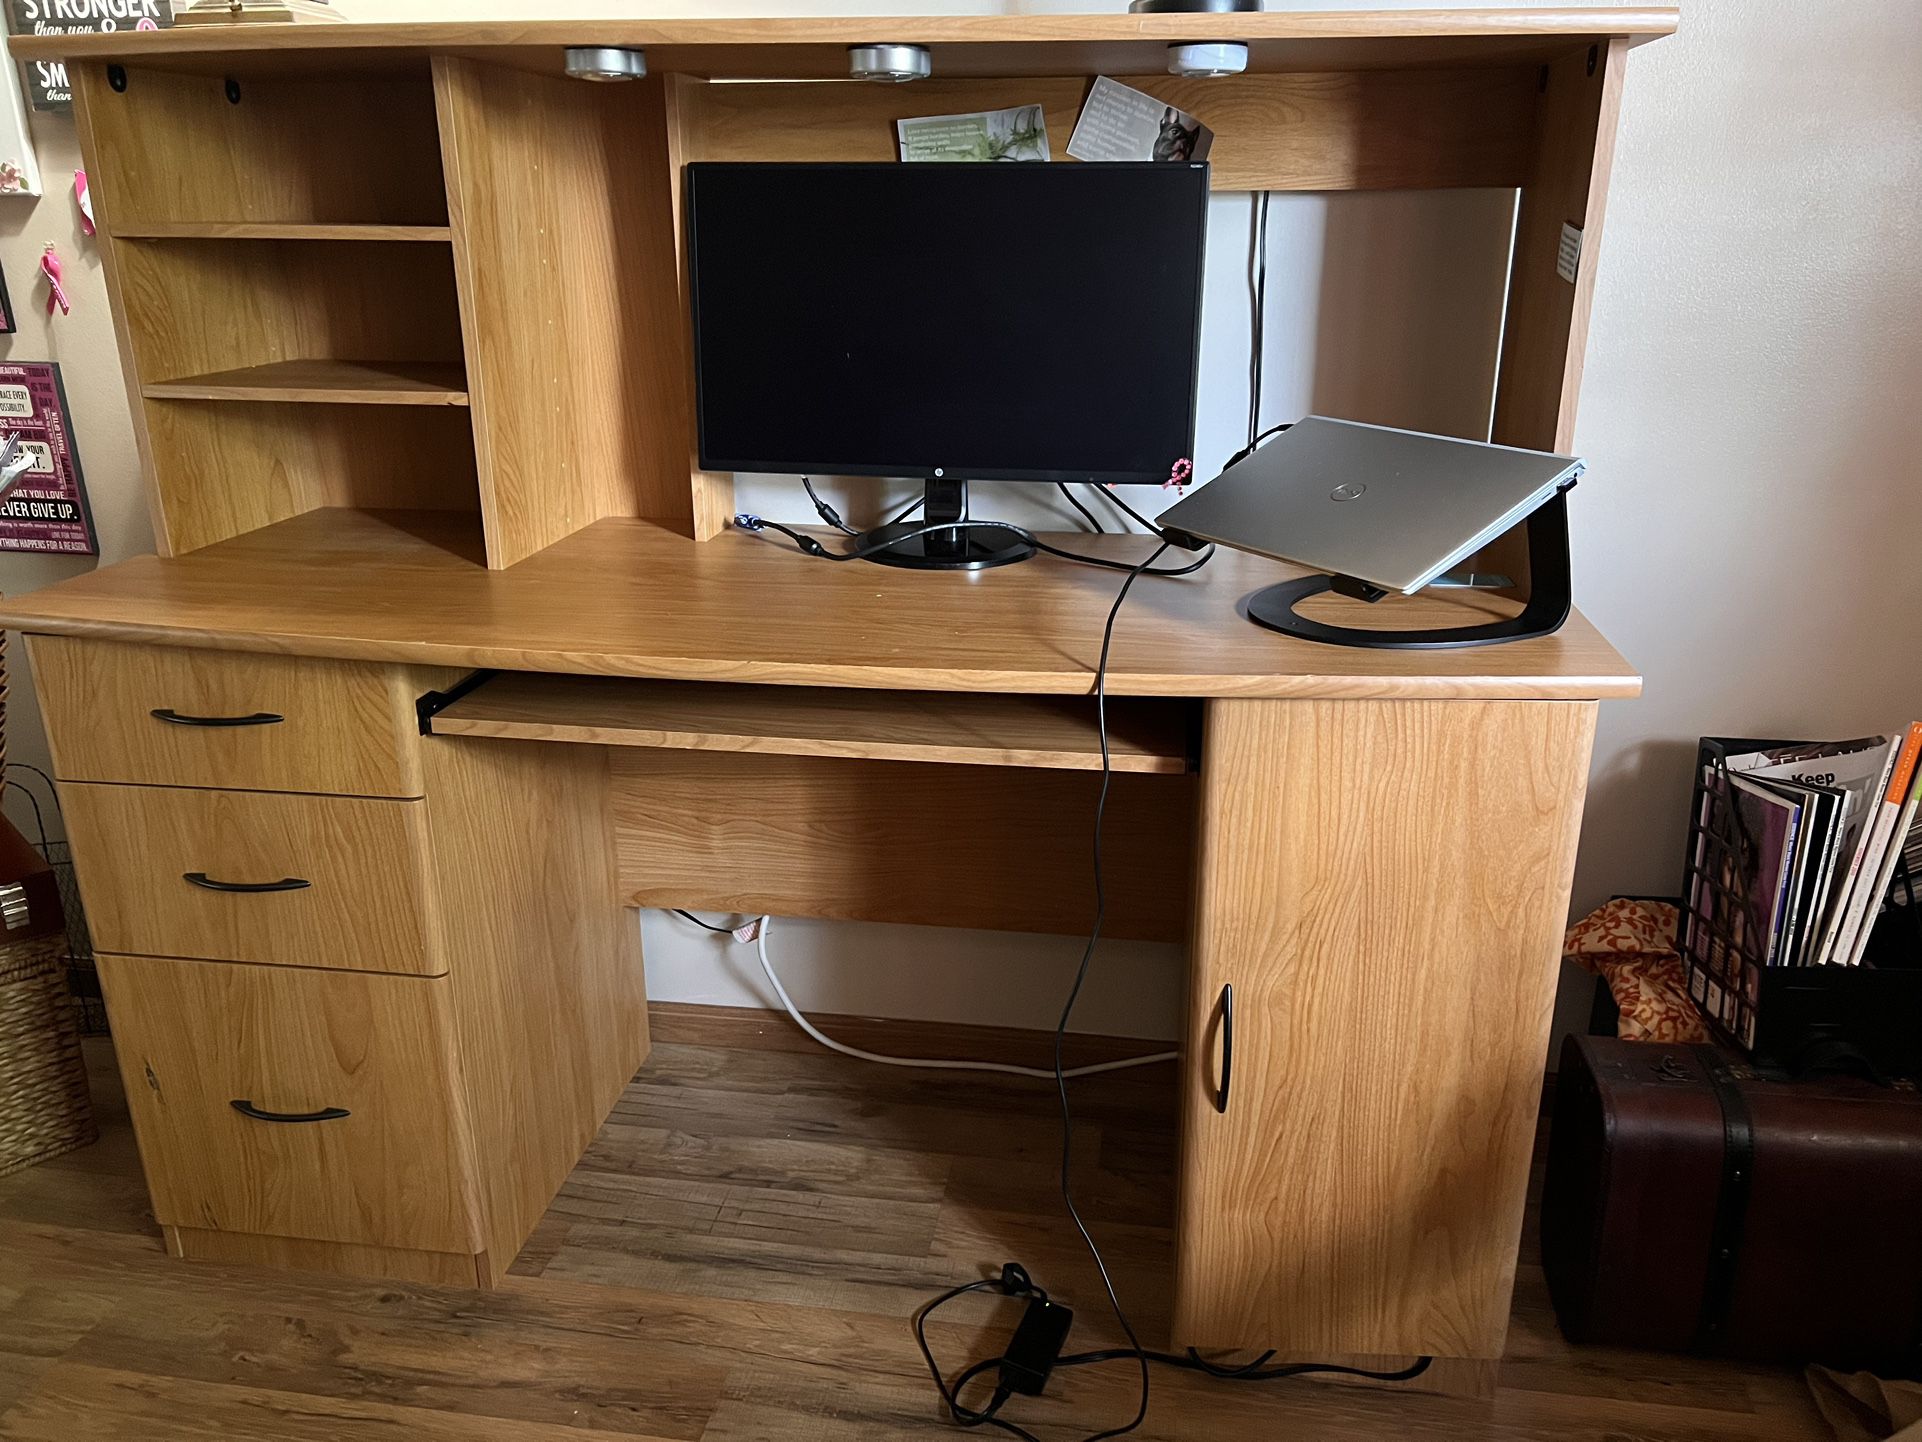 Sauder Desk and Tv Stand With Storage